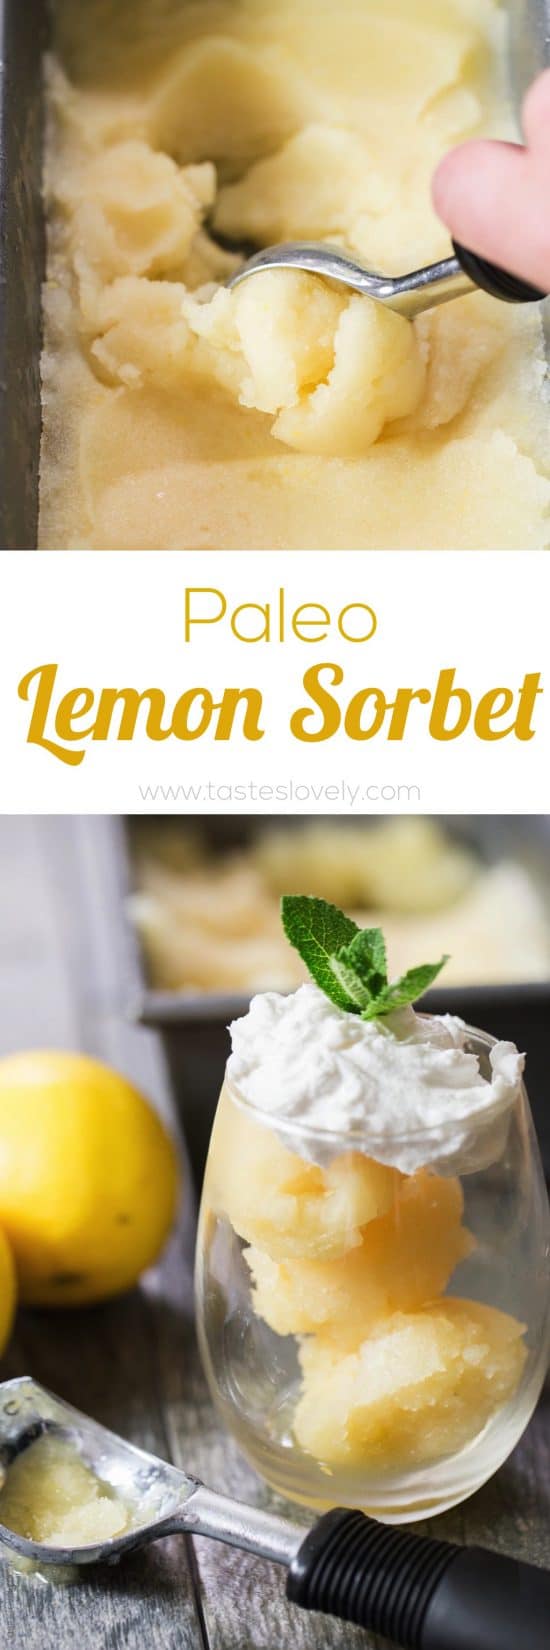 Paleo Lemon Sorbet - a sweet and tart dessert that is just 3 ingredients! Can be made with or without an ice cream maker (paleo, vegan, gluten free, dairy free, refined sugar free)